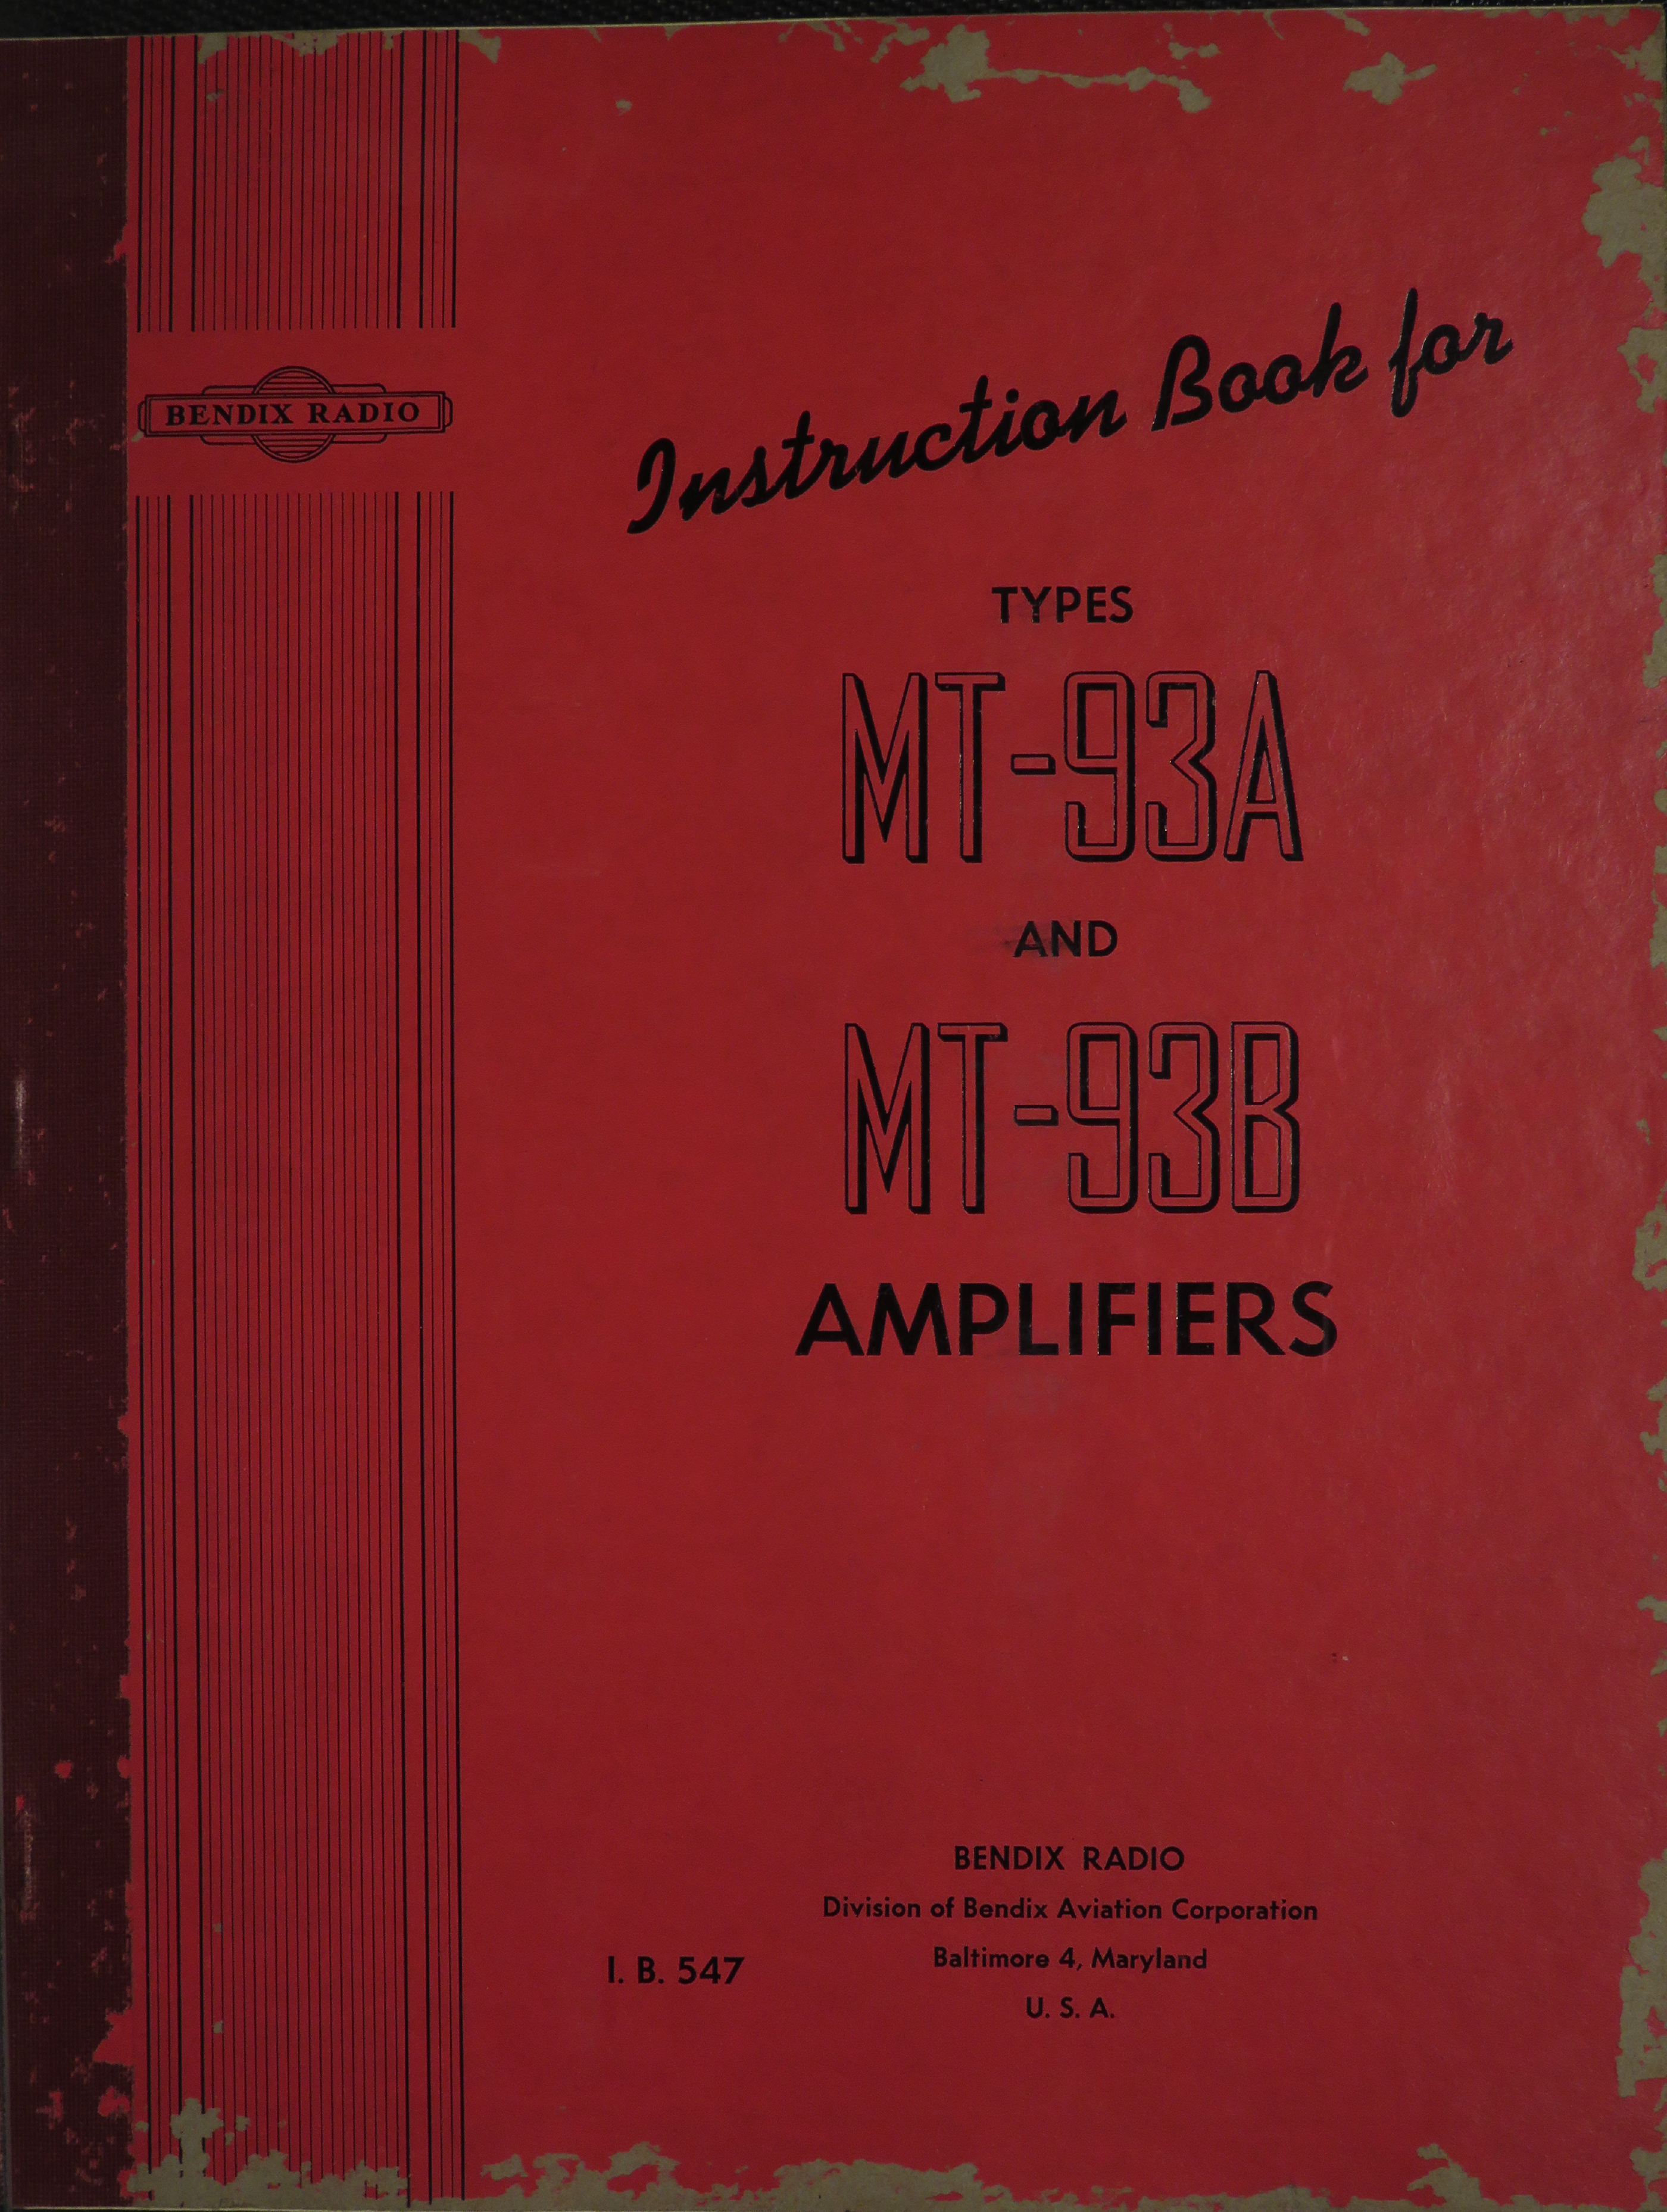 Sample page 1 from AirCorps Library document: Instruction Book for Types MT-93A and MT-93B Amplifiers